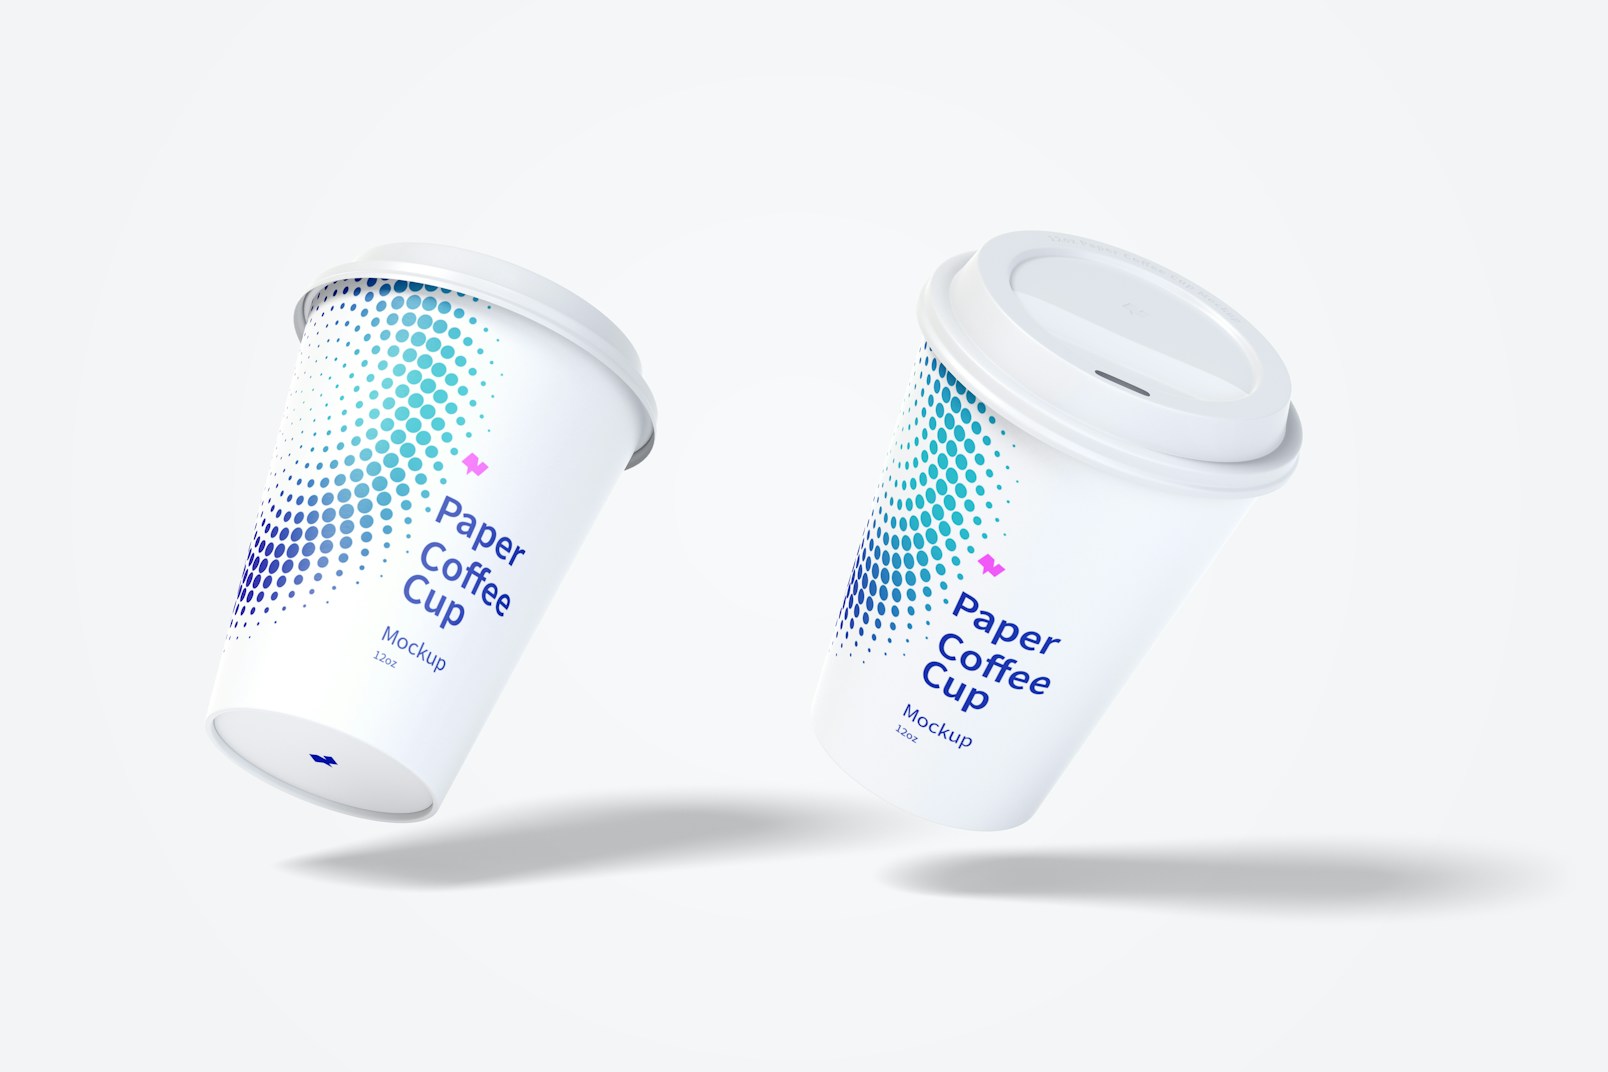 12oz Paper Coffee Cups Mockup, Floating 03